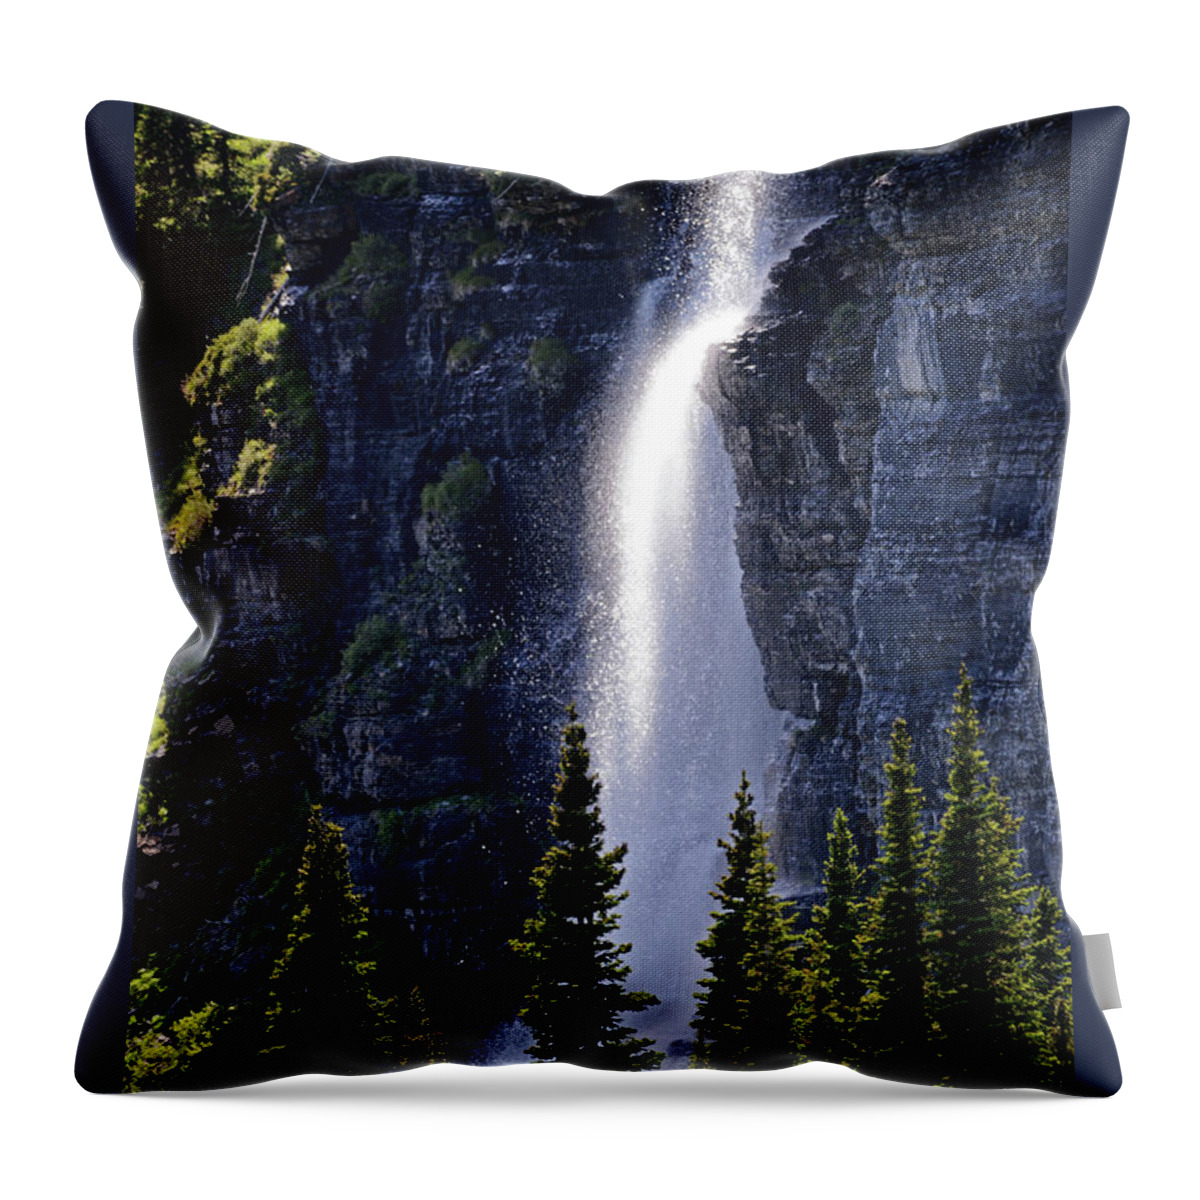 Waterfall Throw Pillow featuring the photograph Mystical Waterfall by Whispering Peaks Photography